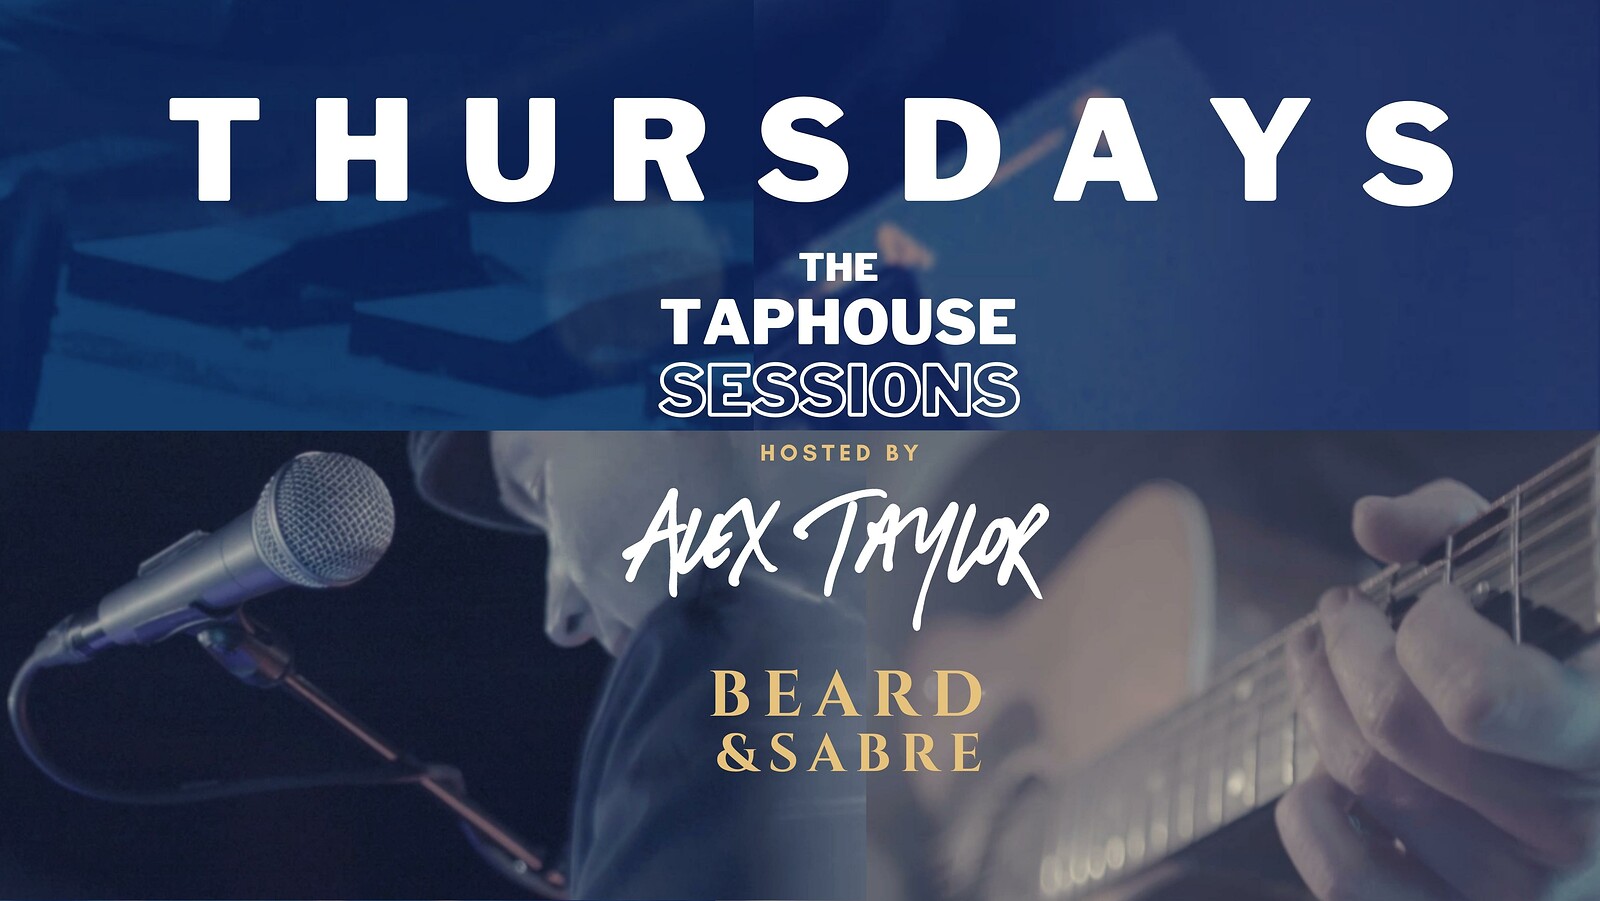 The Taphouse Sessions feat. LARKHAM & HALL at Beard & Sabre